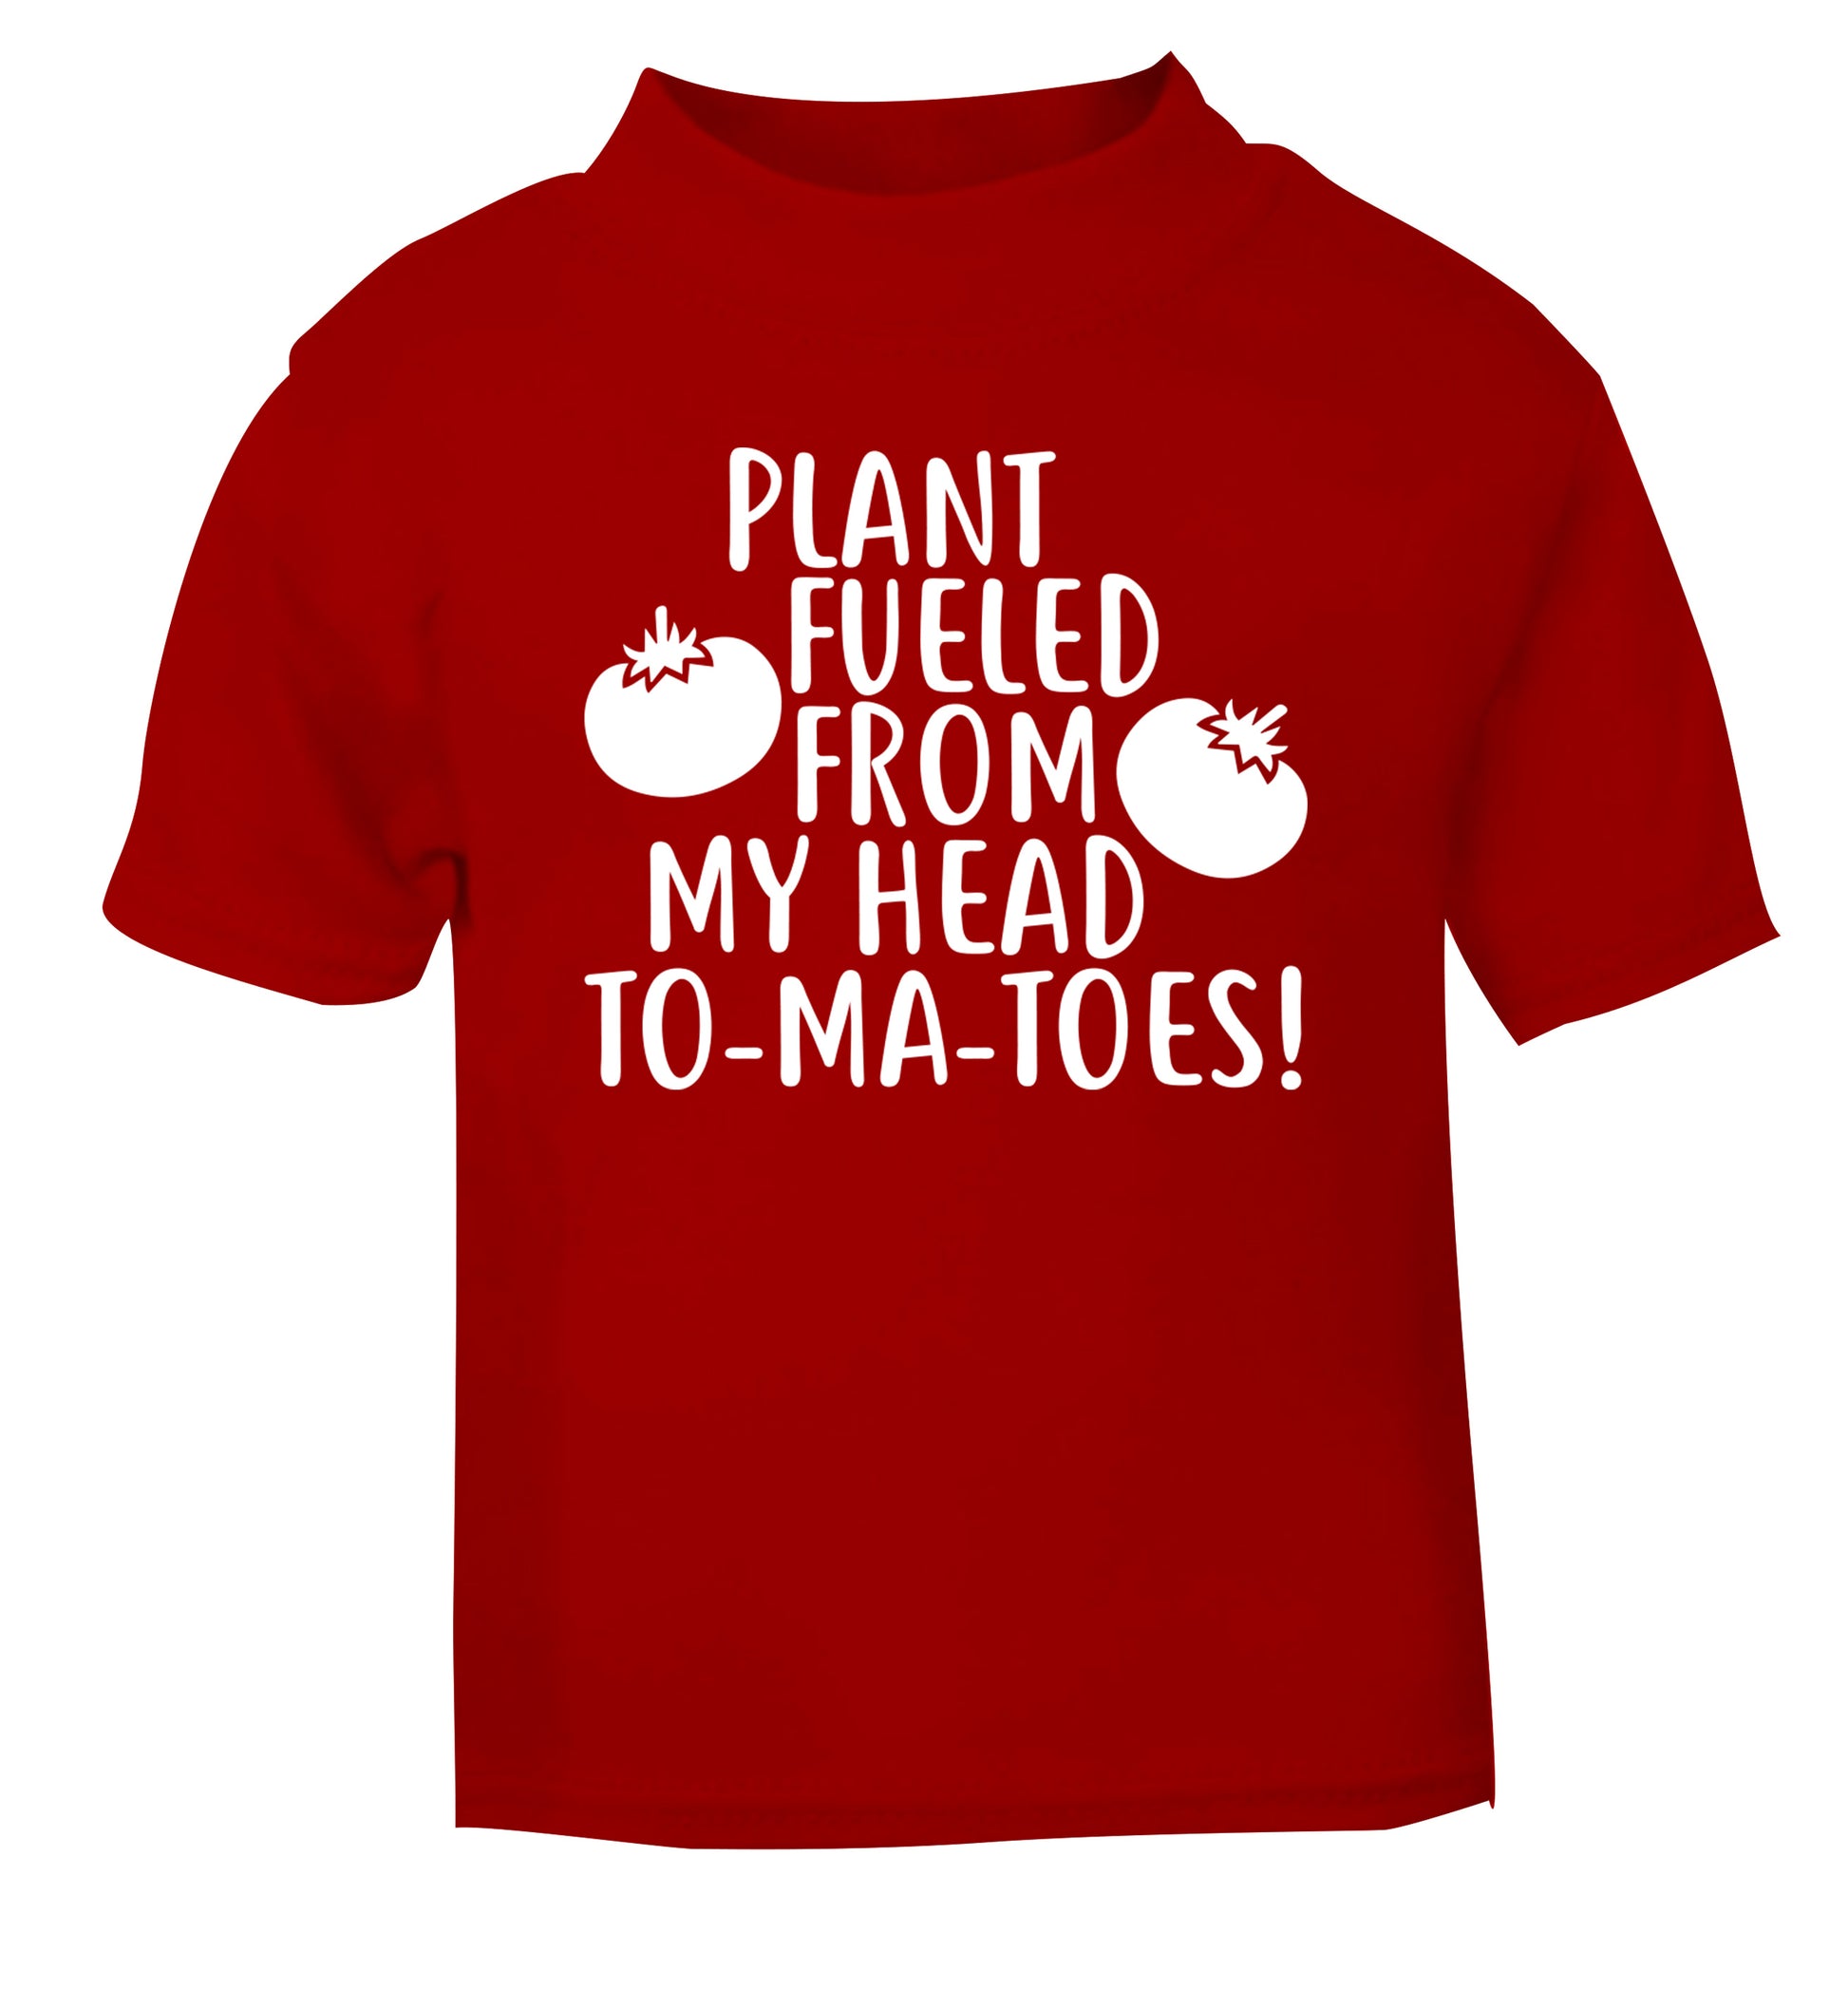 Plant fueled from my head to-ma-toes red Baby Toddler Tshirt 2 Years